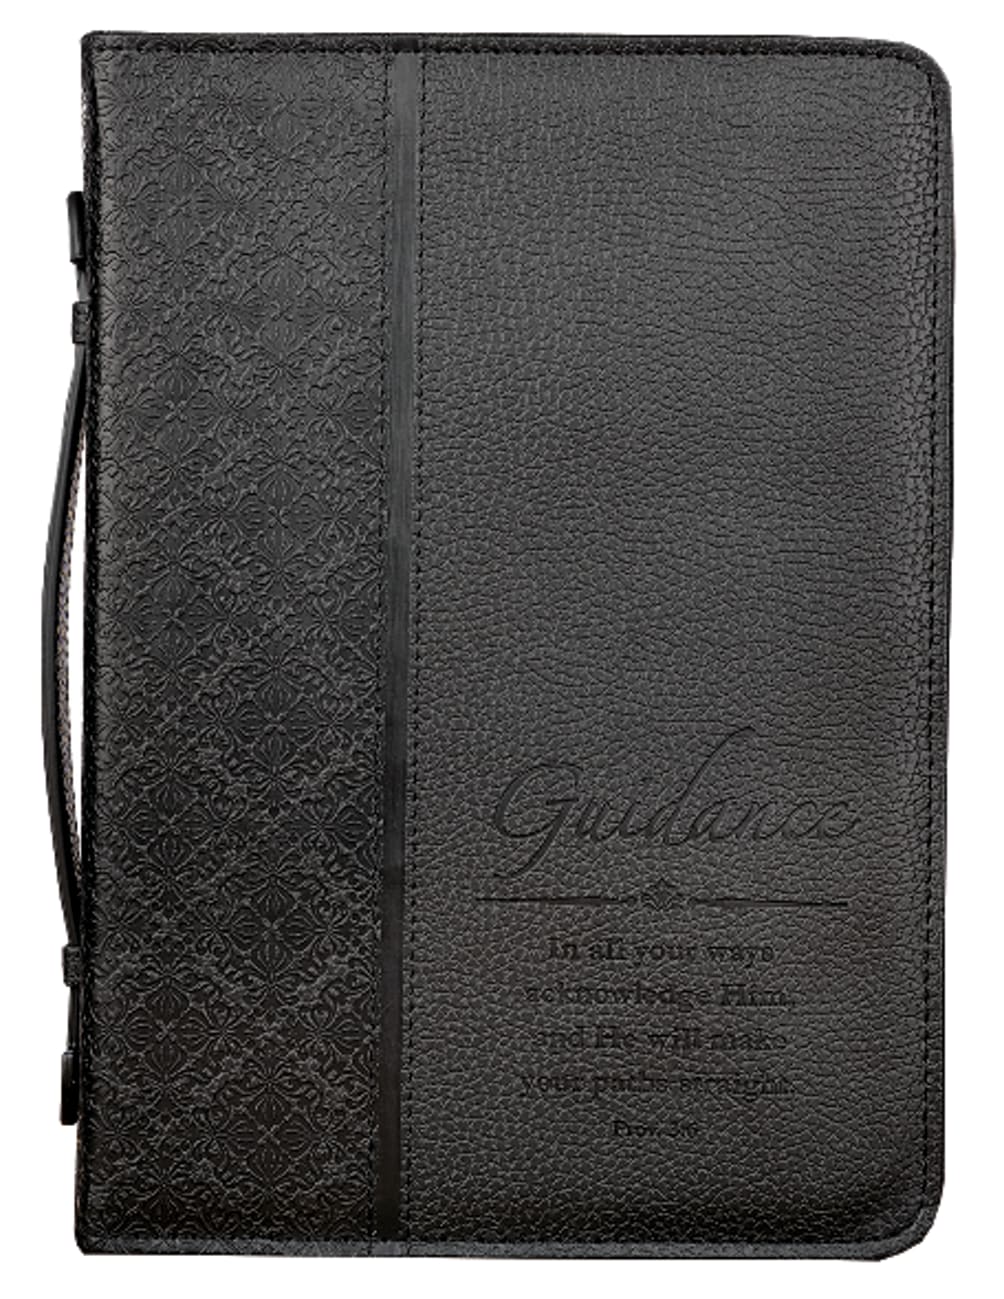 Bible Cover Classic Large: Guidance Proverbs 3:6 Black Luxleather Bible Cover